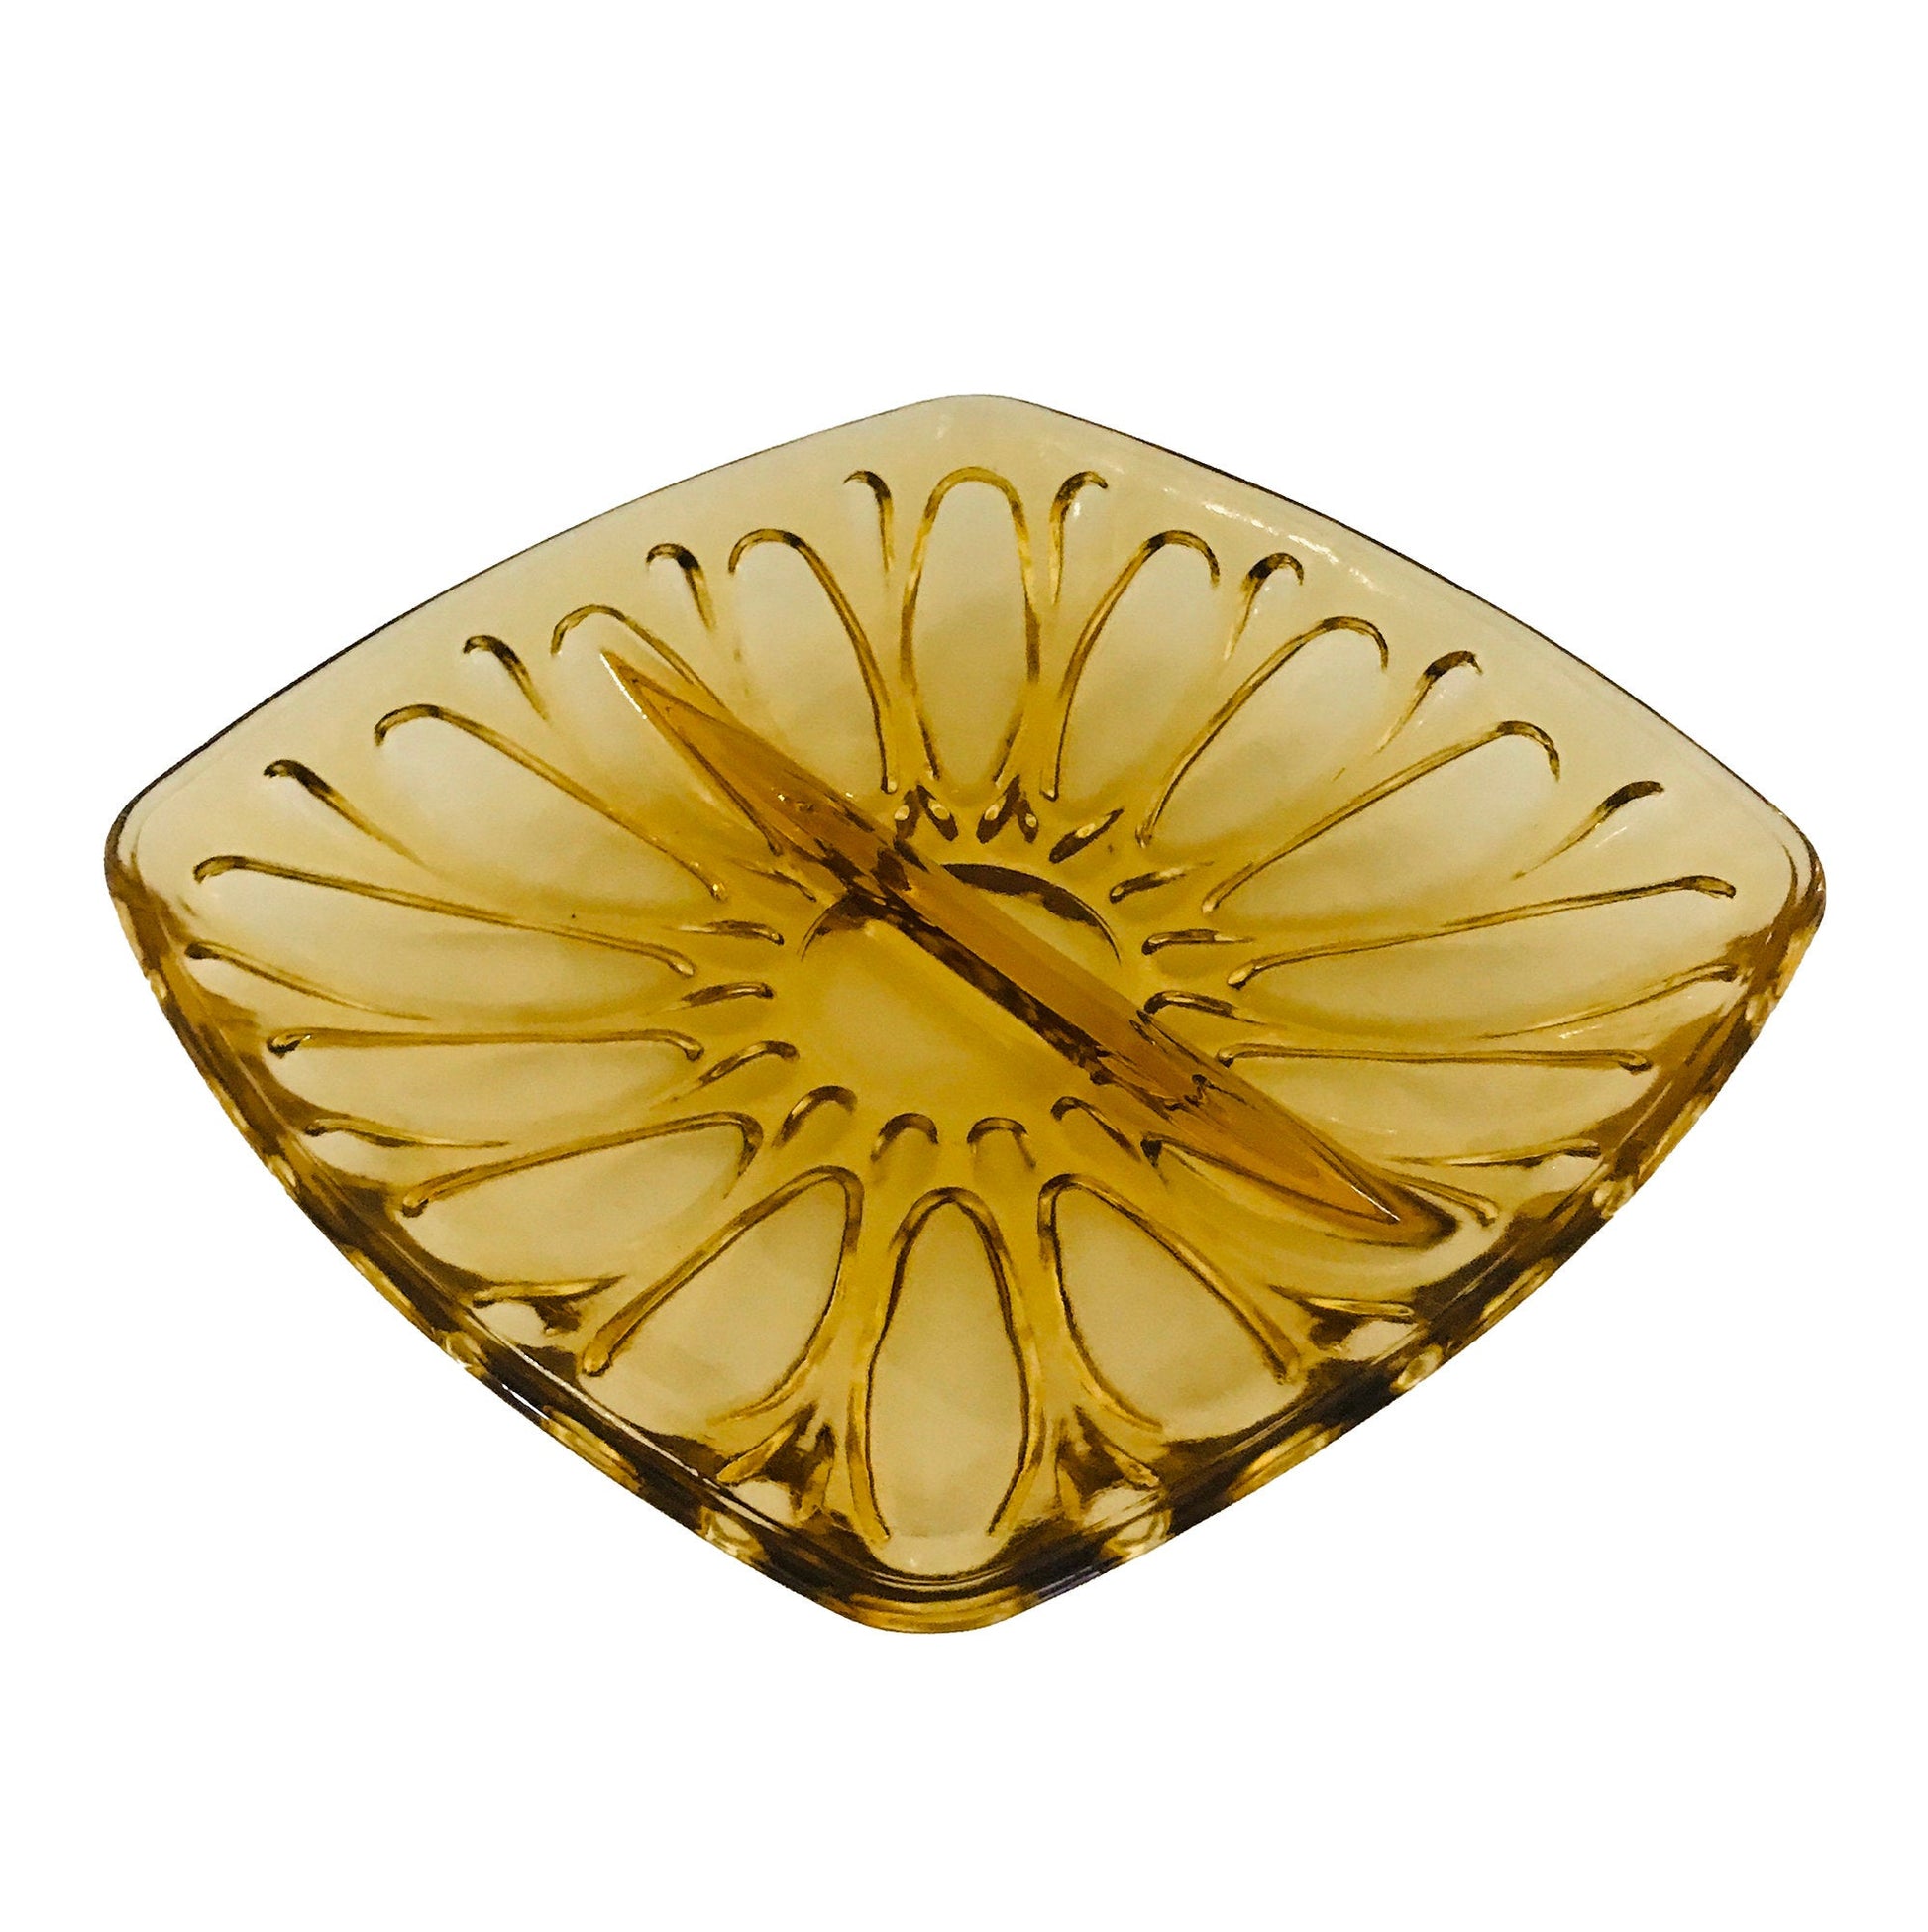 Vintage Amber Pressed Glass Sectioned Serving Bowl, Serving Dish, Candy Dish, Serving Plate - PawPurrPrints.com